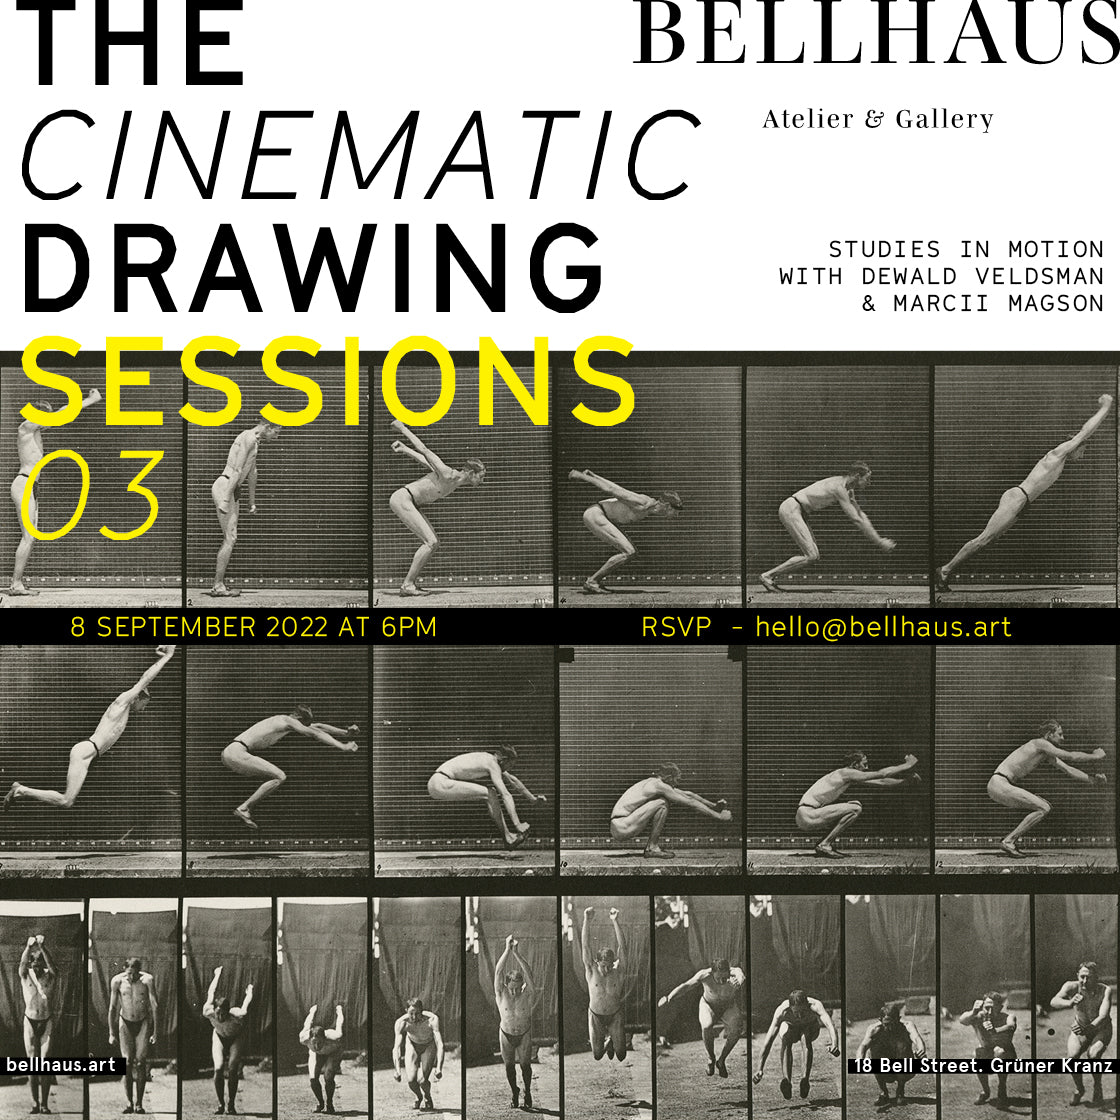 THE CINEMATIC DRAWING SESSIONS  03